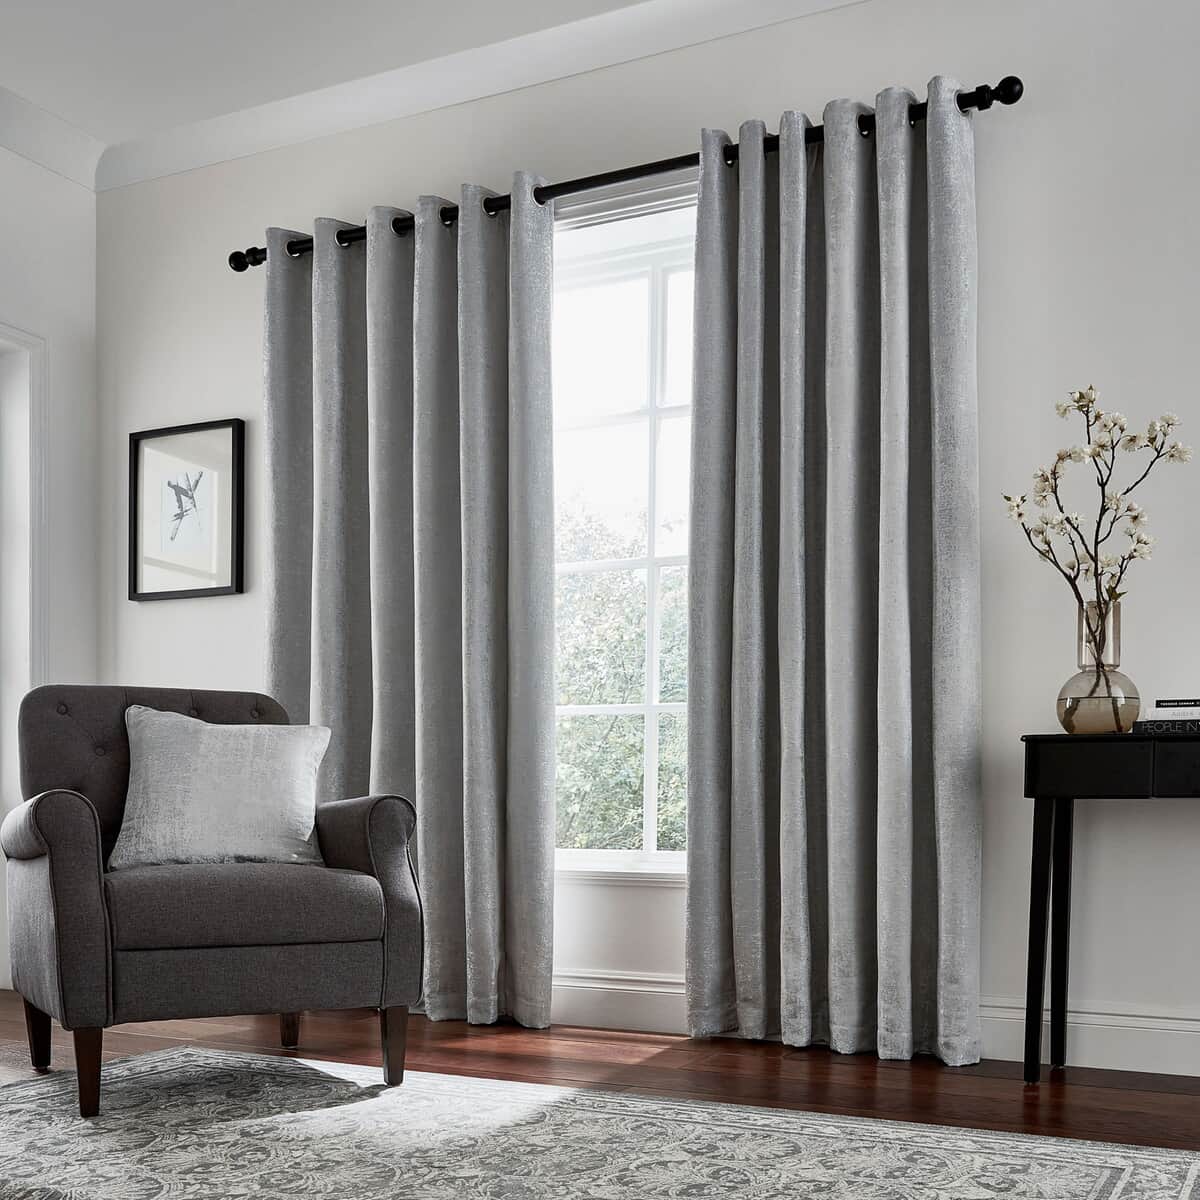 Helena Springfield Roma Curtains Silver large